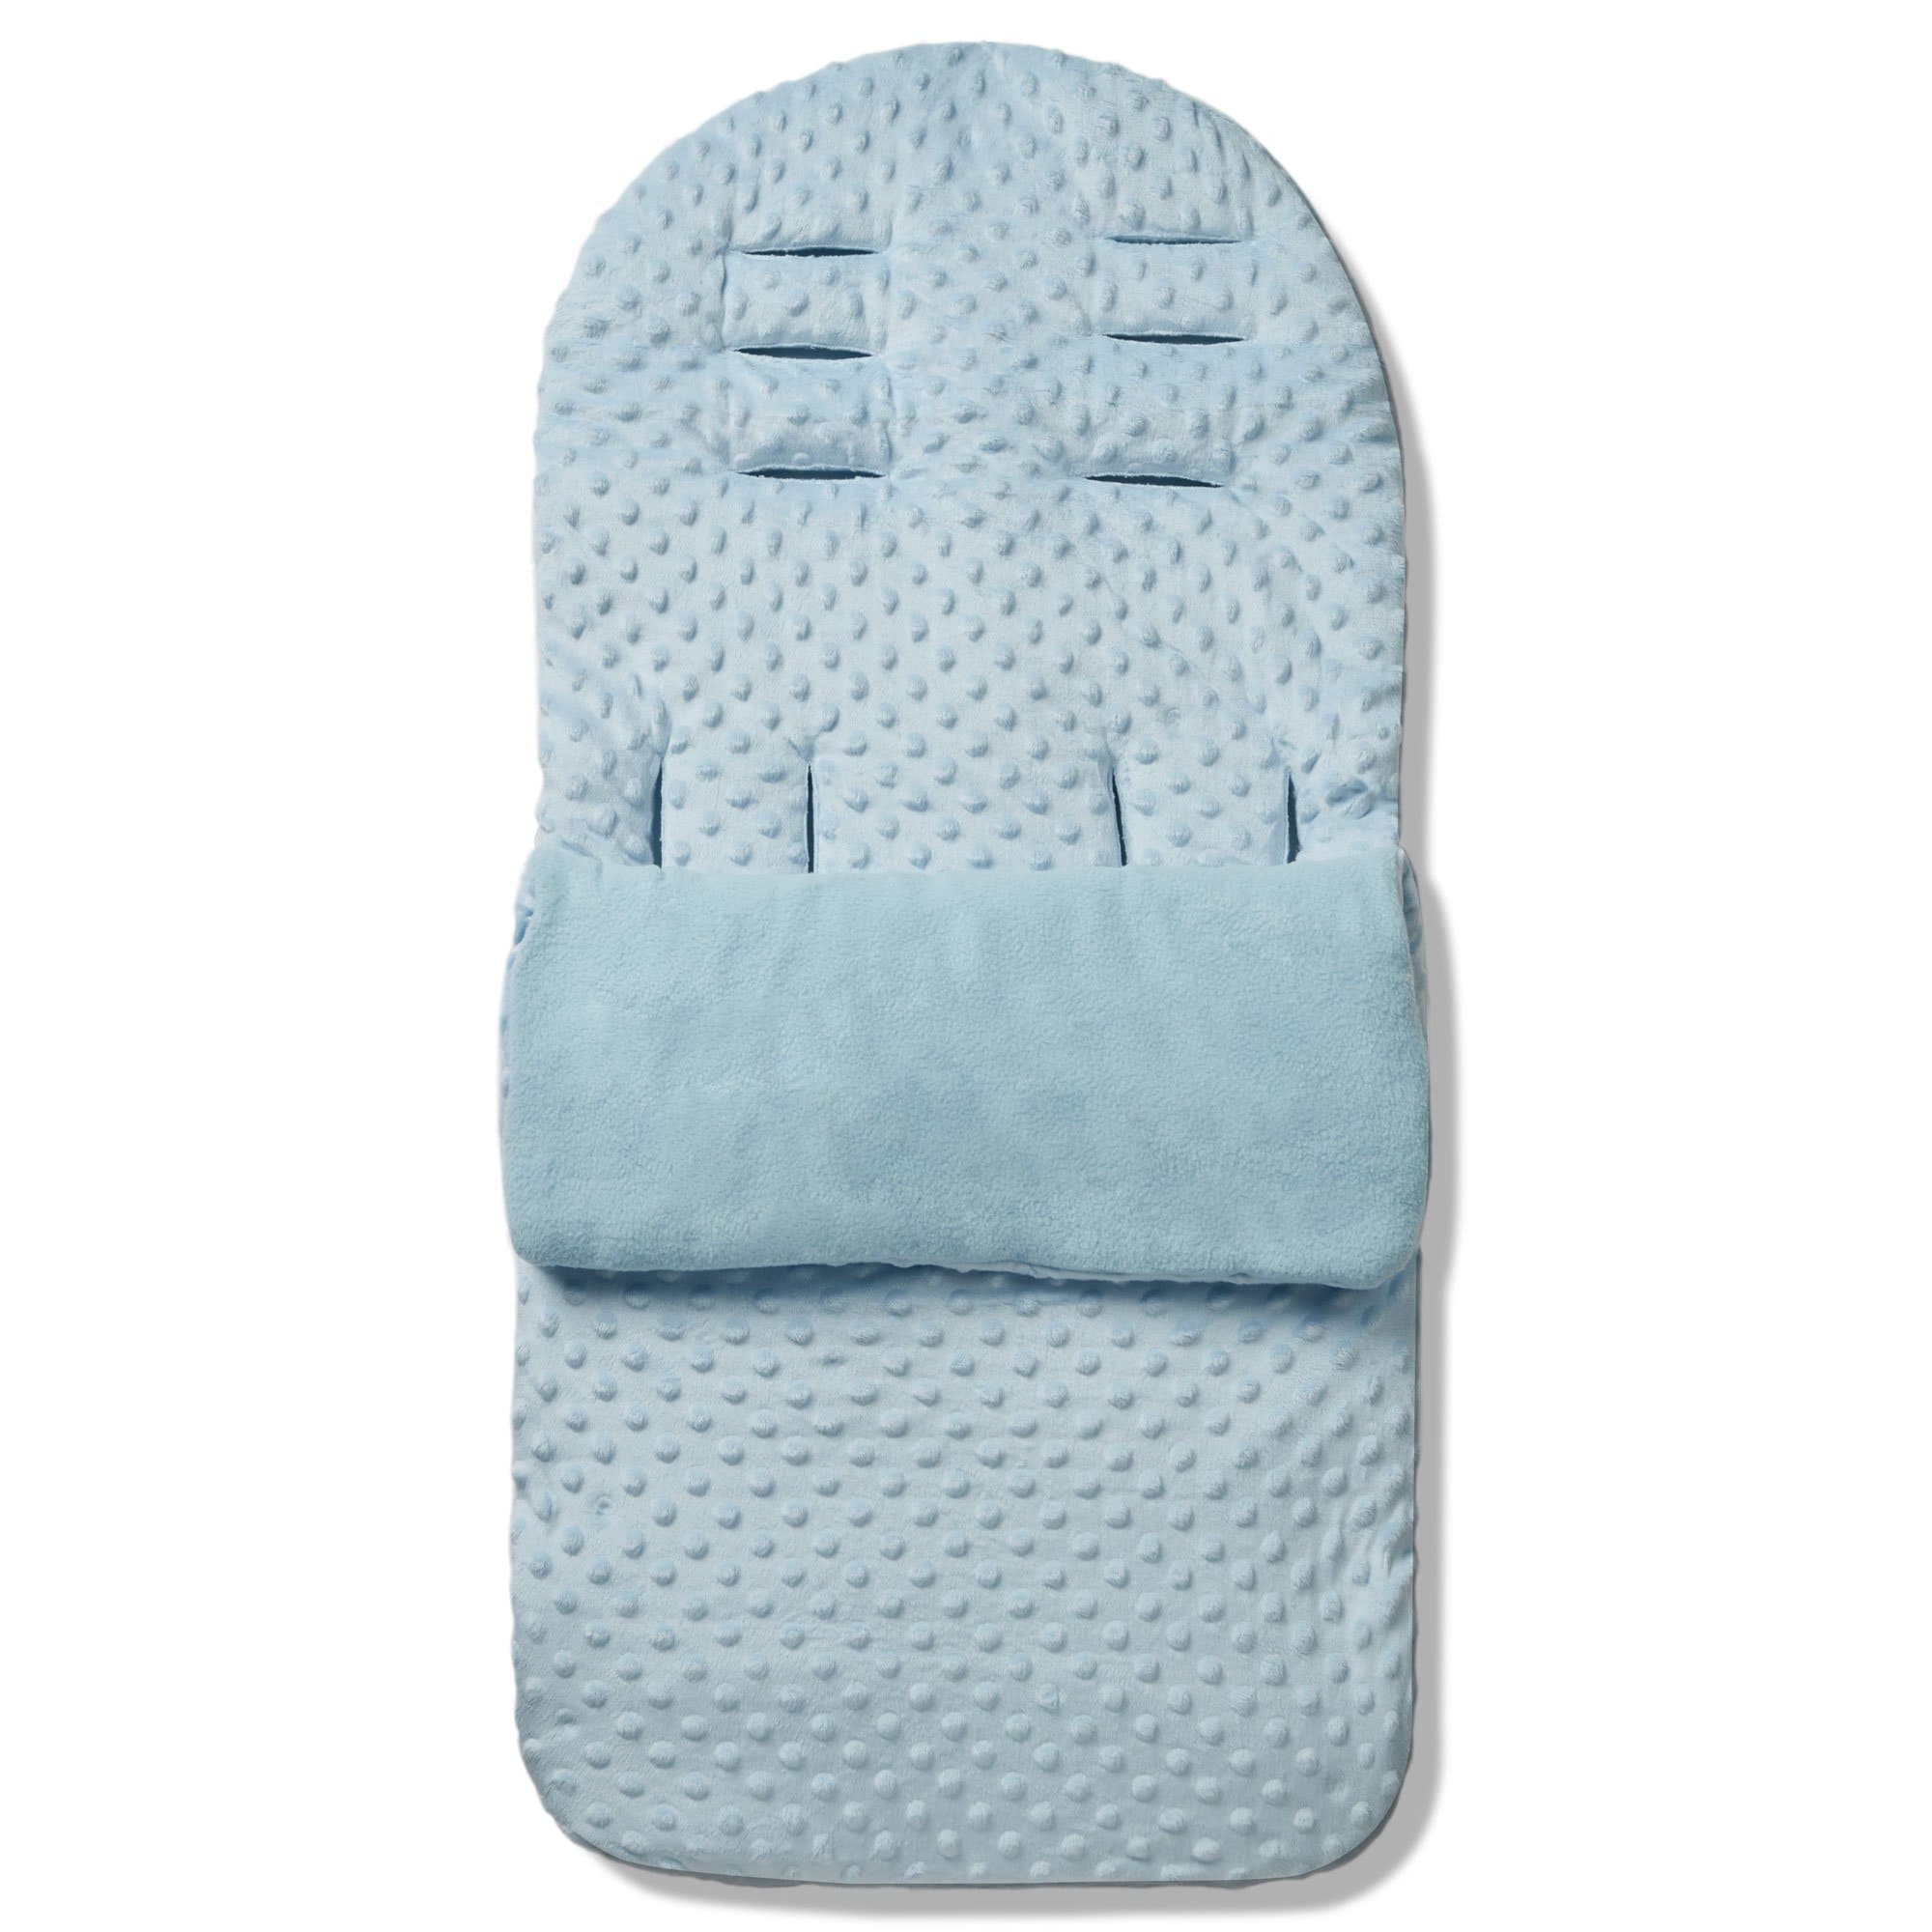 Dimple Footmuff / Cosy Toes Compatible with BabySun - For Your Little One